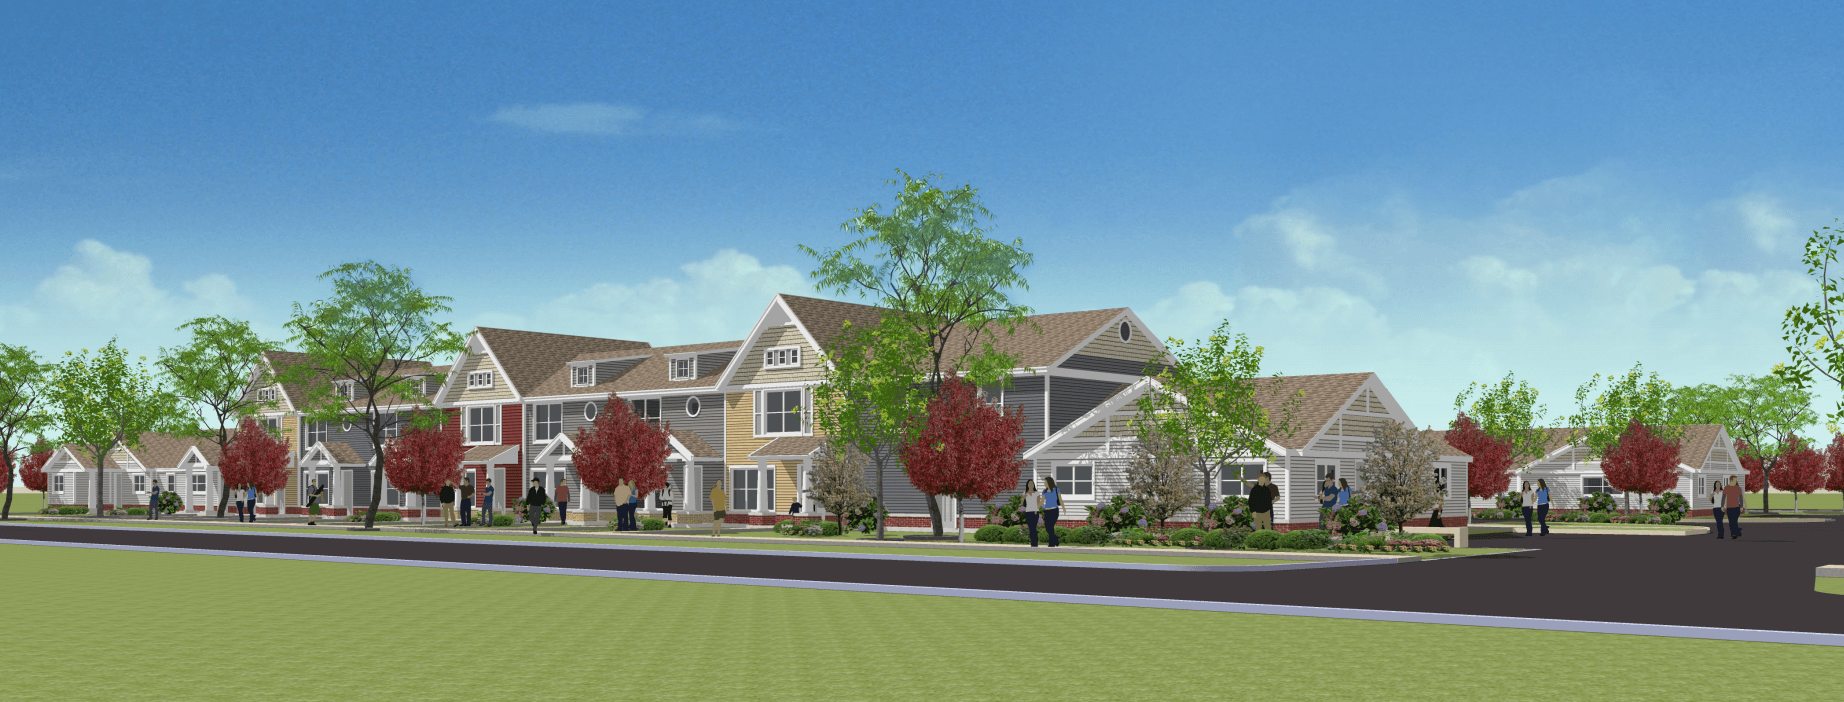 illustration of a new planned community with mixed 1 and 2 story homes & duplexes